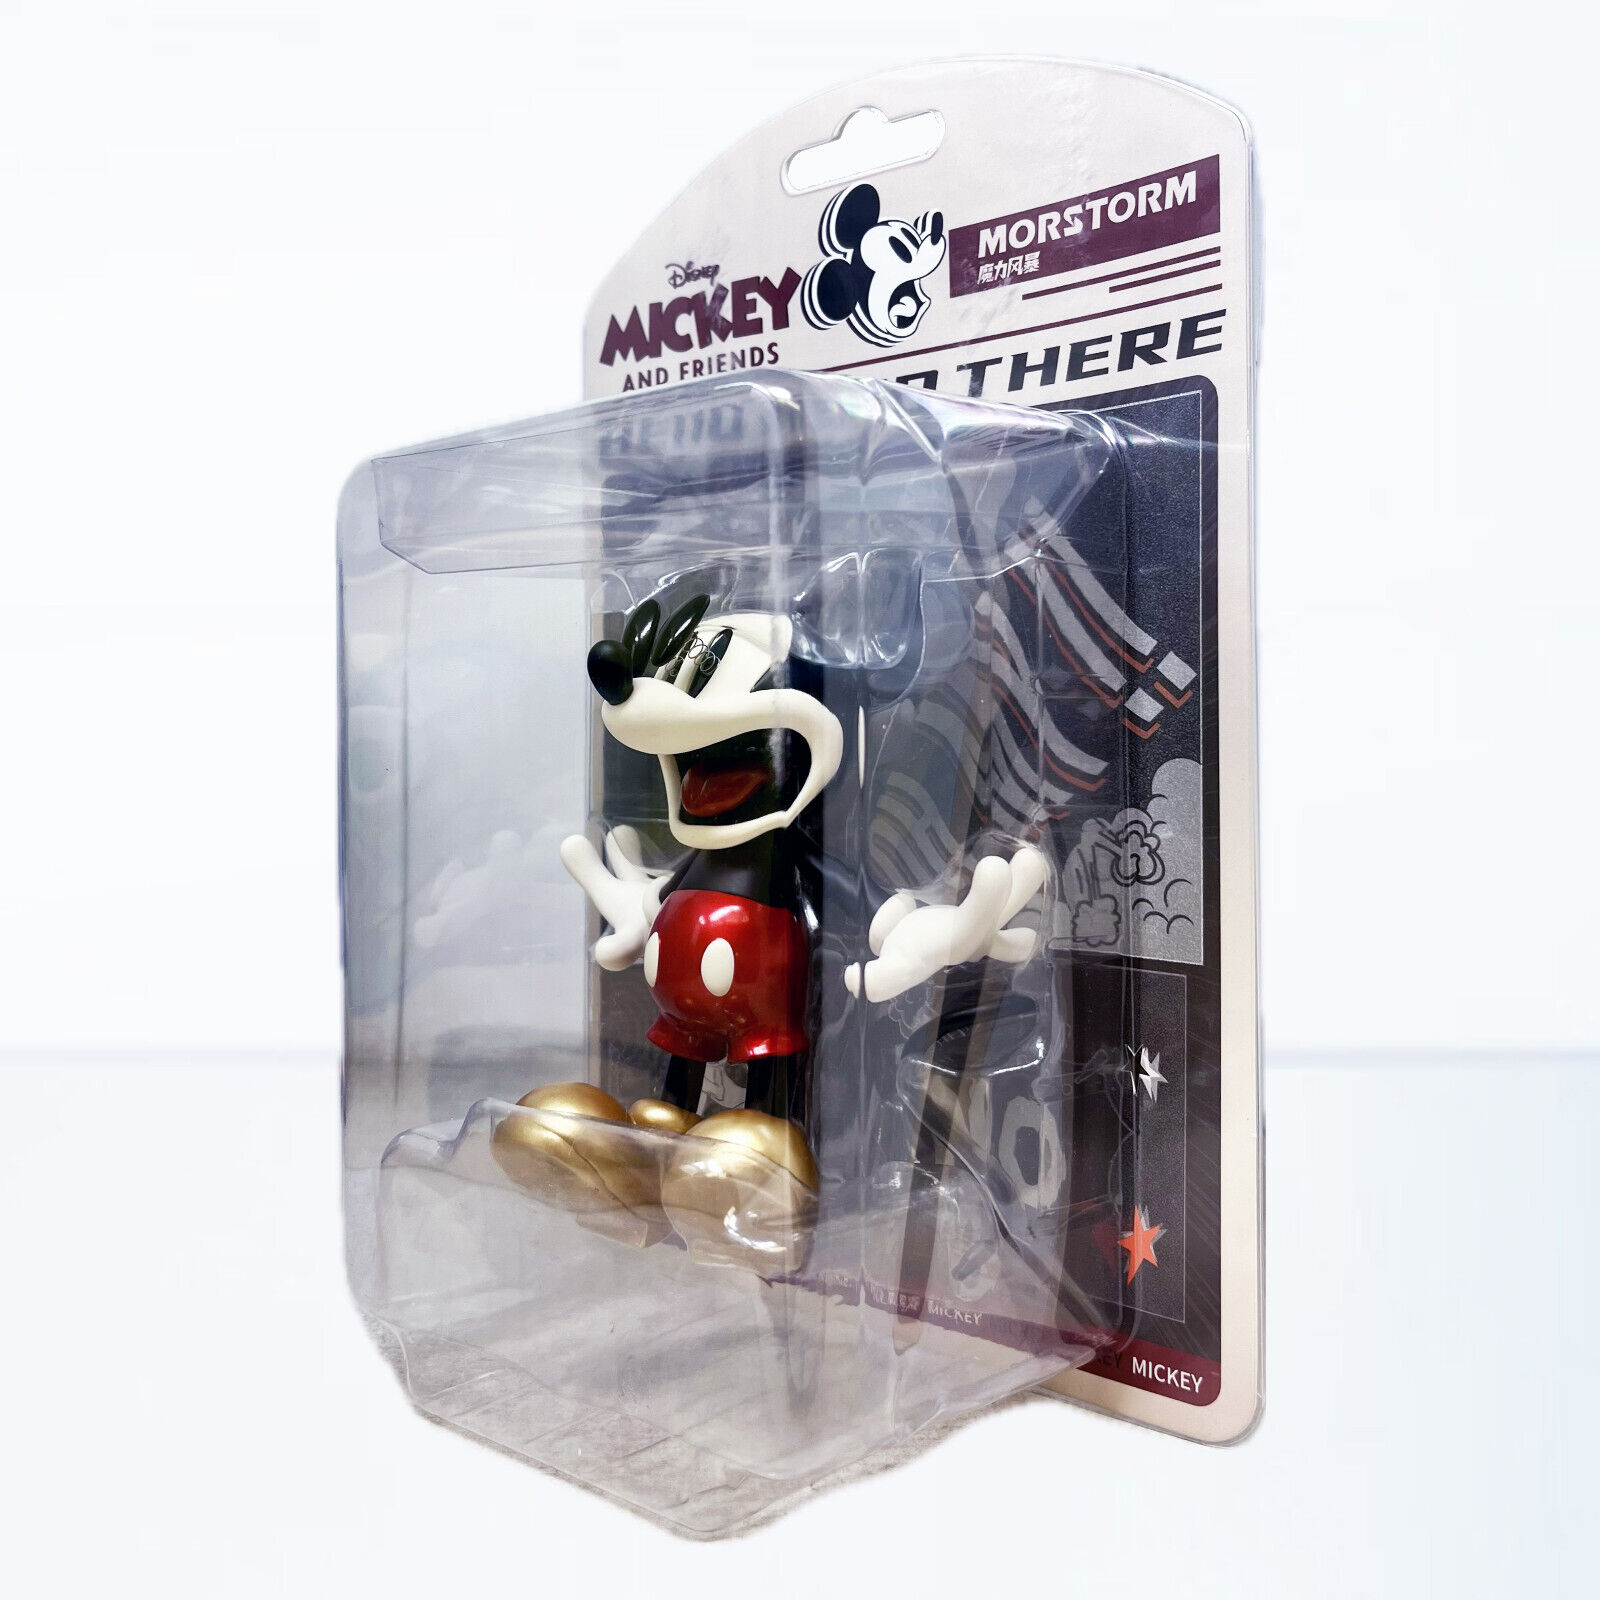 Morstorm Disney 100th Anniversary Classic Scared Mickey Mouse 6